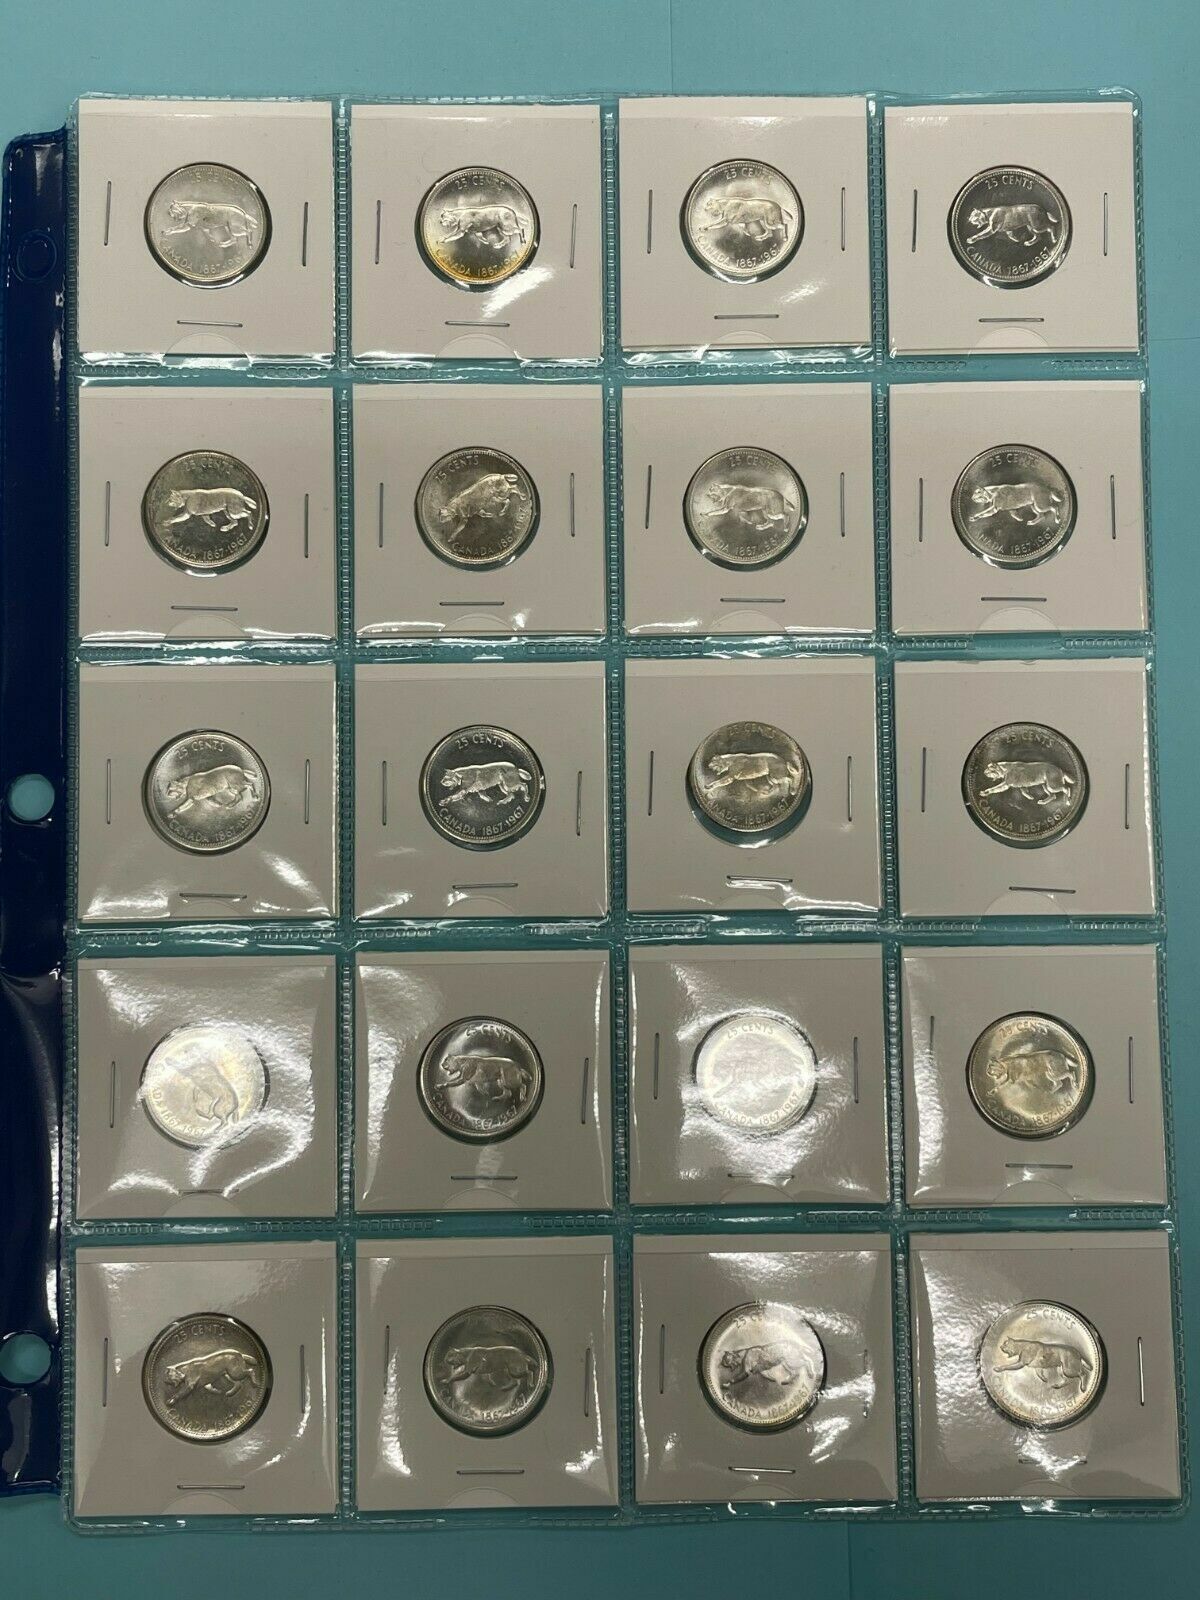 Canada 1867 - 1967 25 Cents Lot of 20 silver quarters